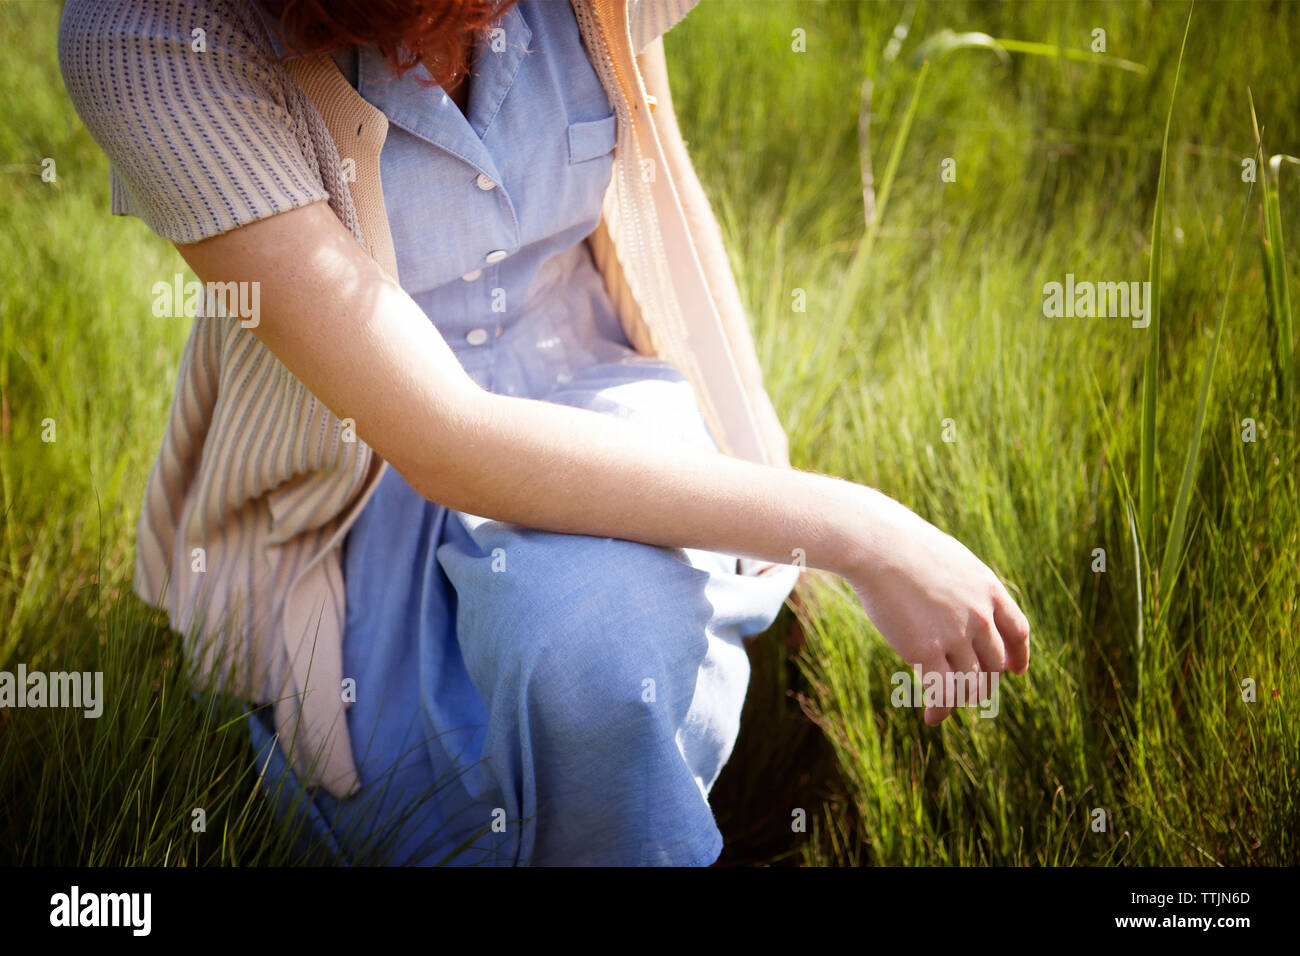 Midsection of woman crouching on grassy field Banque D'Images